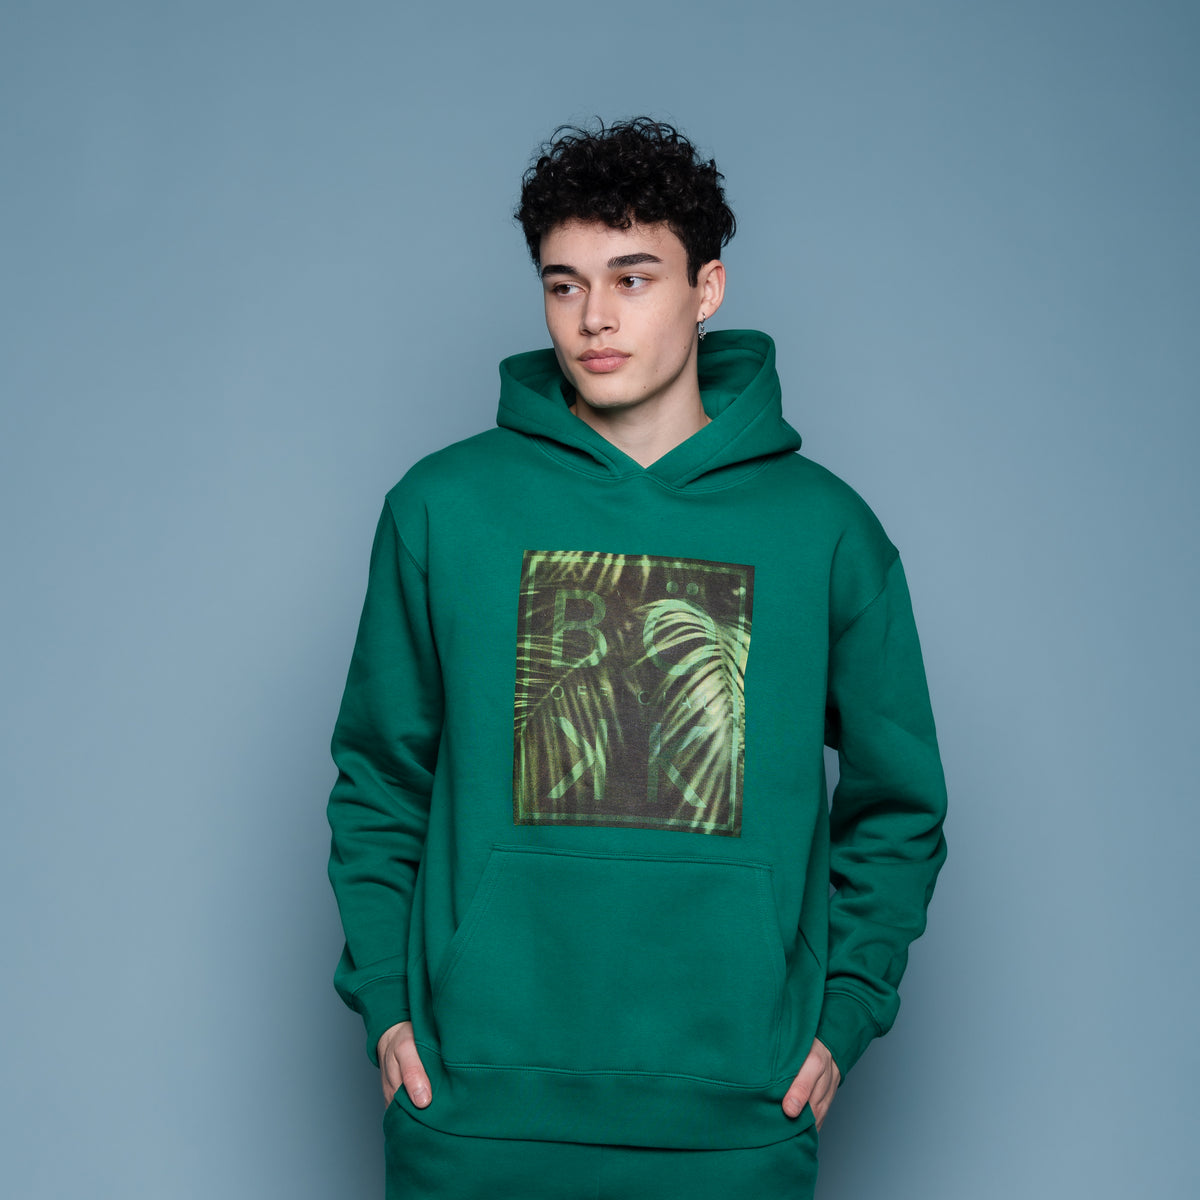 Hoodie in Forest green